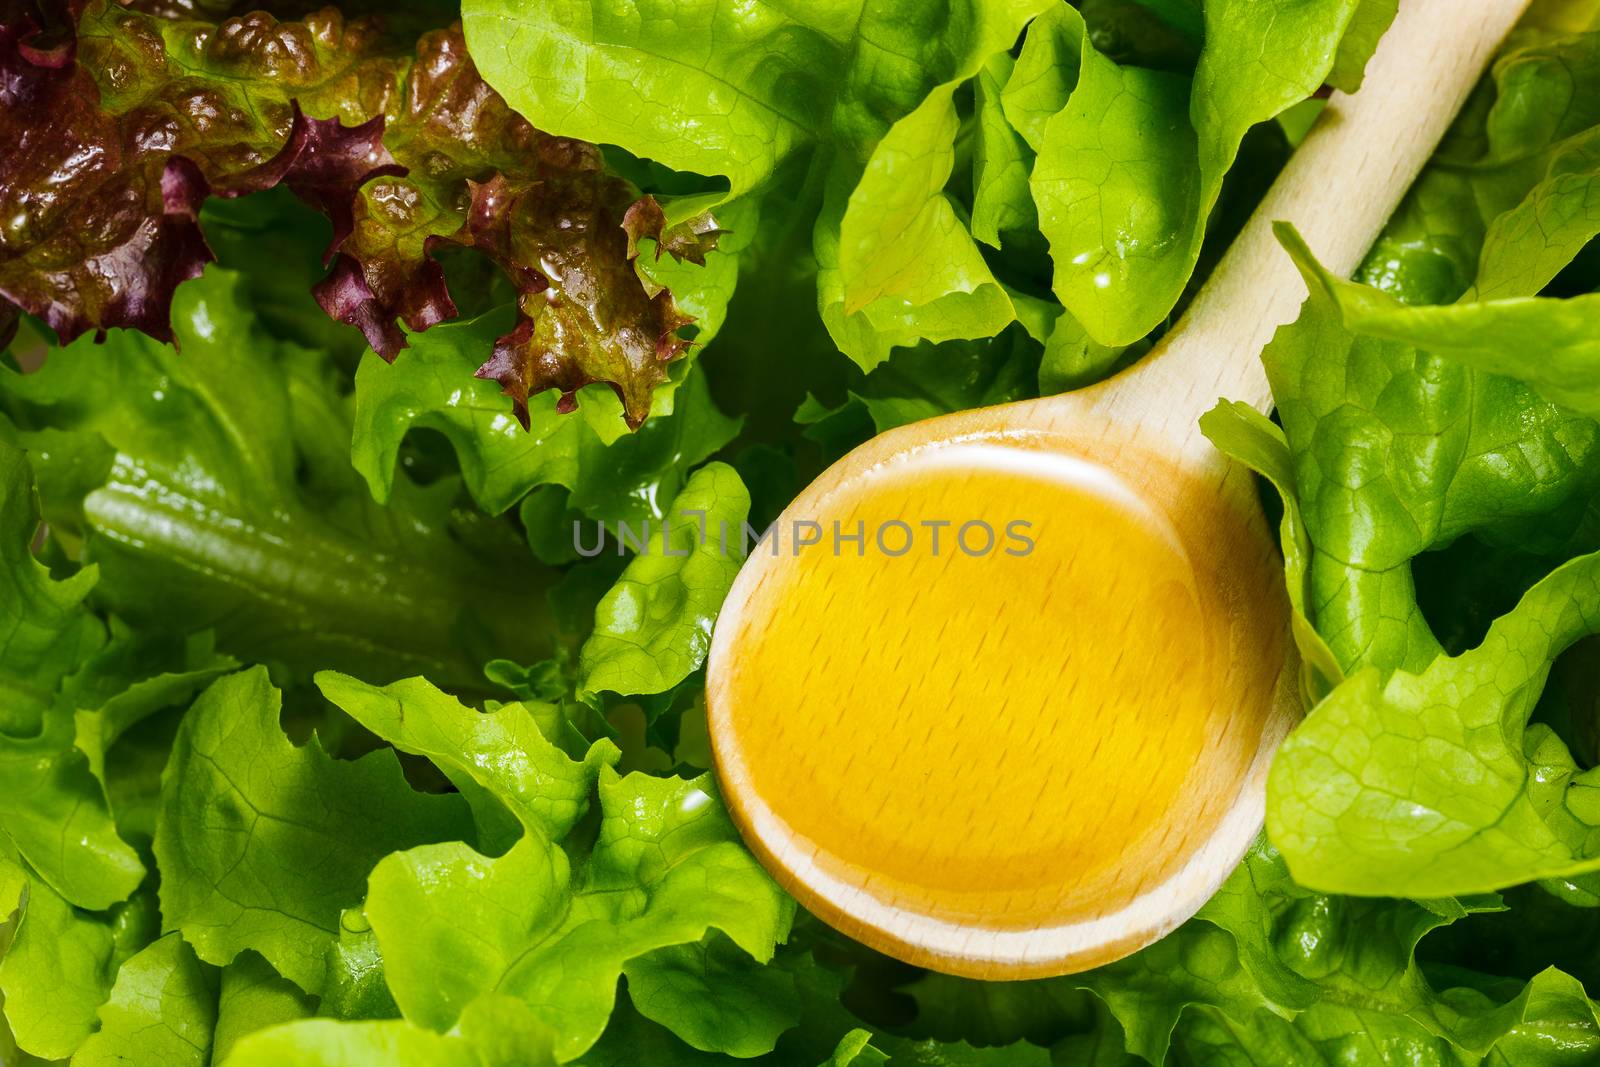 Salad with olive oil by Slast20